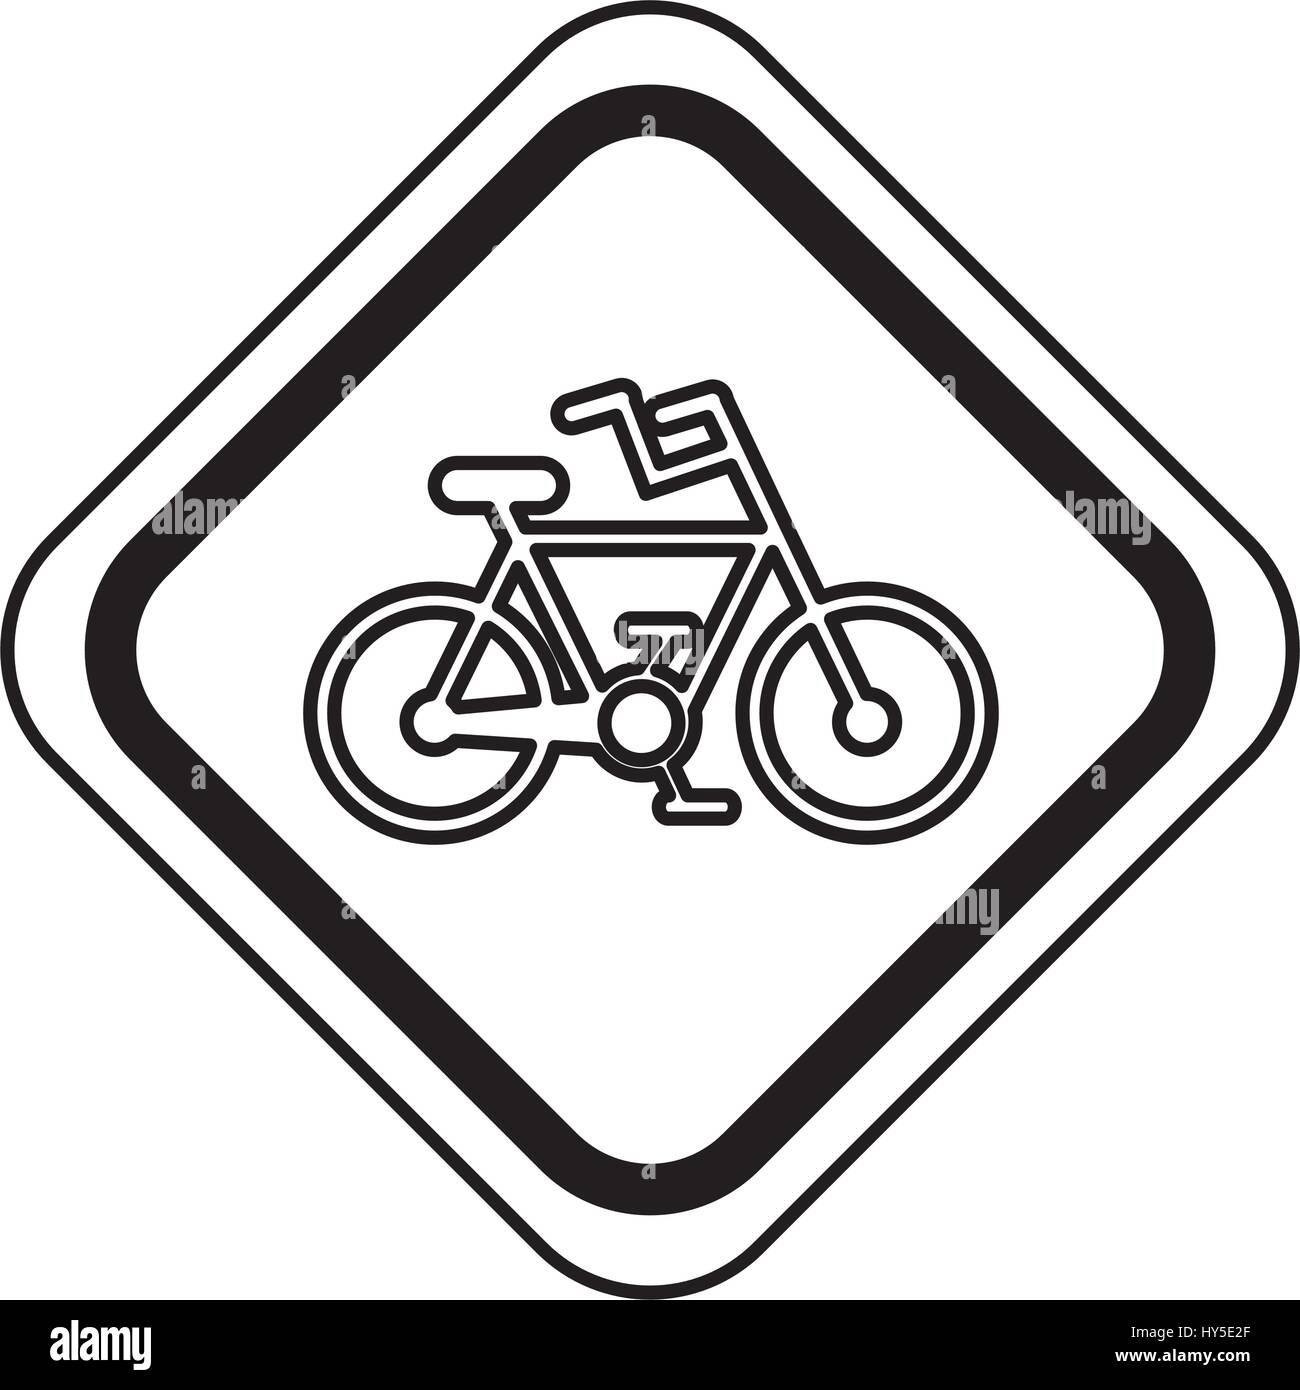 traffic signal with bicycle vehicle isolated icon vector illustration design Stock Vector